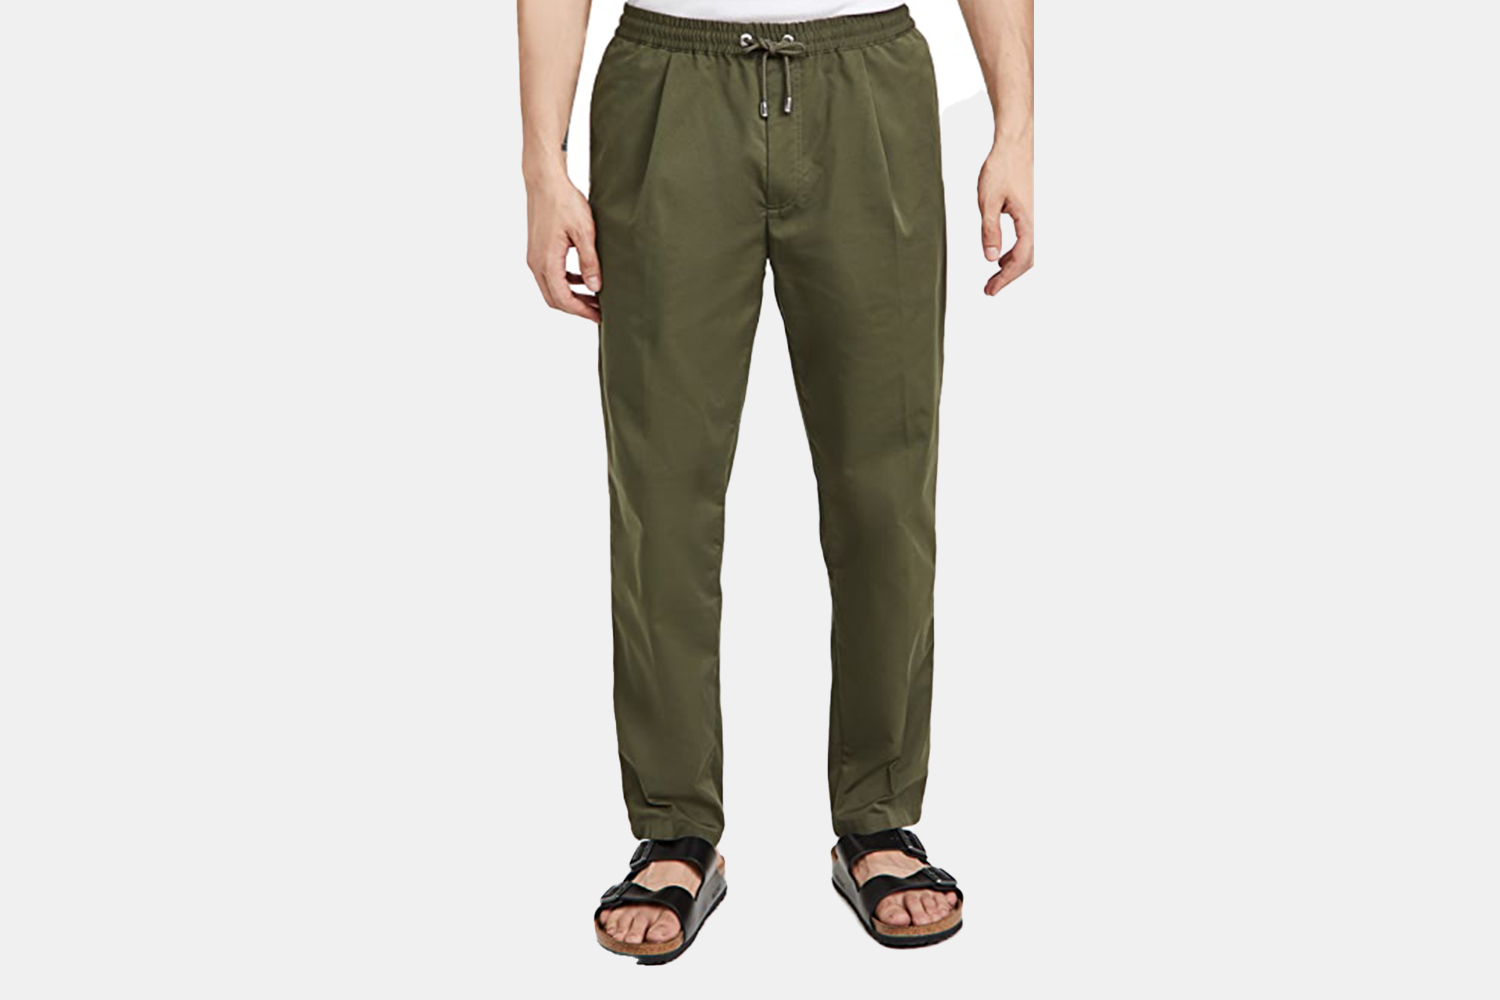 a pair of olive green, relaxed pants.